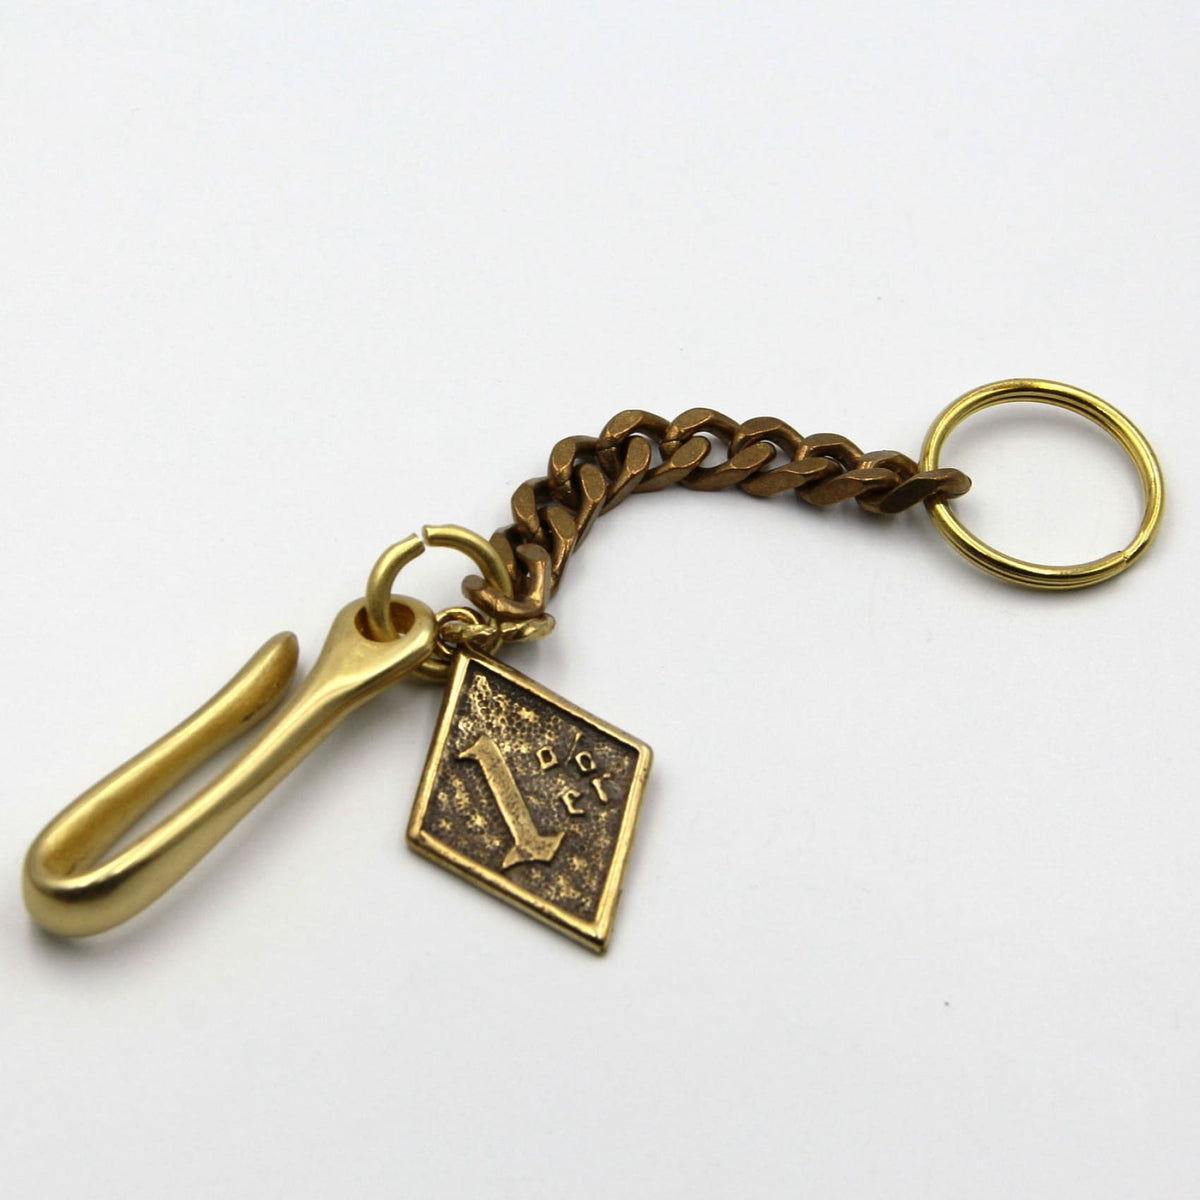 Customizable Metal Keychains For Men KR043 Brass Key Ring With Creative  Pendant Design Perfect Small Gift For Activities From Dongfangmei, $2.19